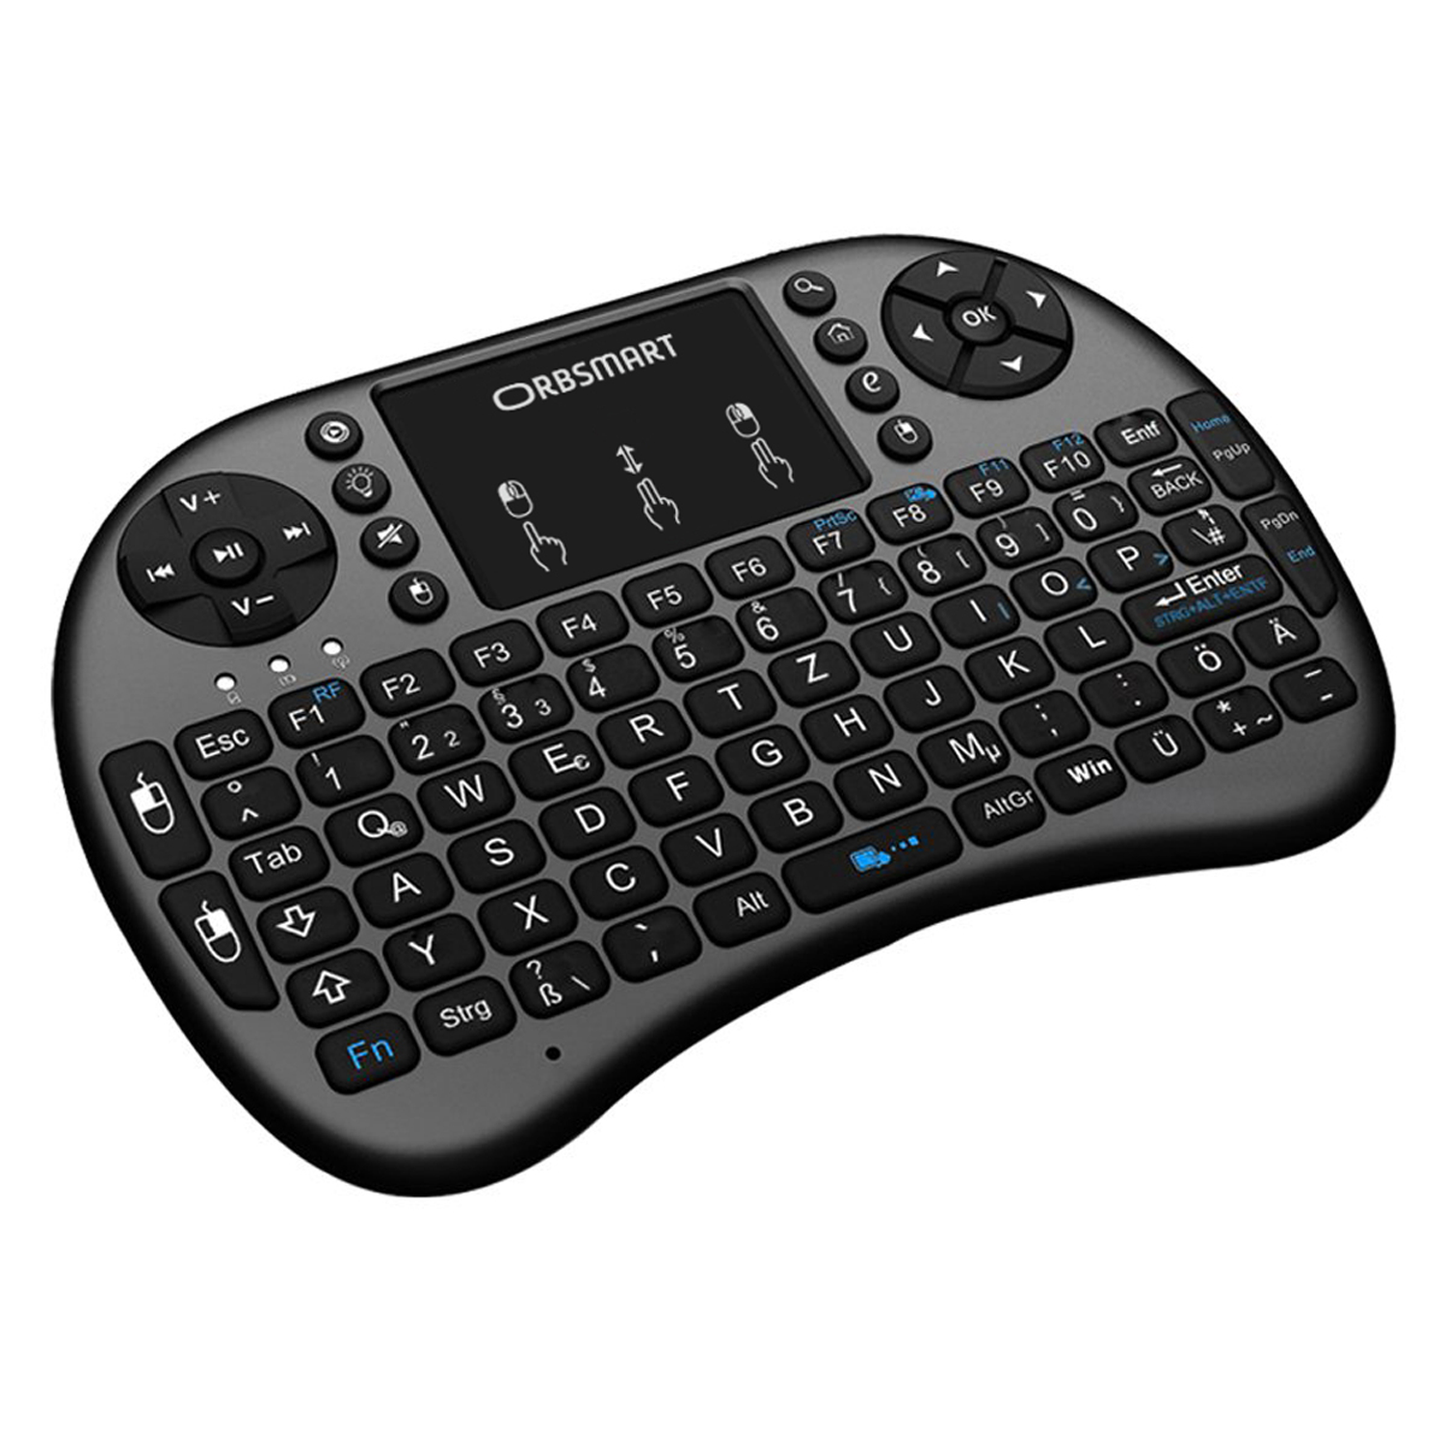 Orbsmart AM-2 wireless keyboard with integrated touchpad & LED lighting